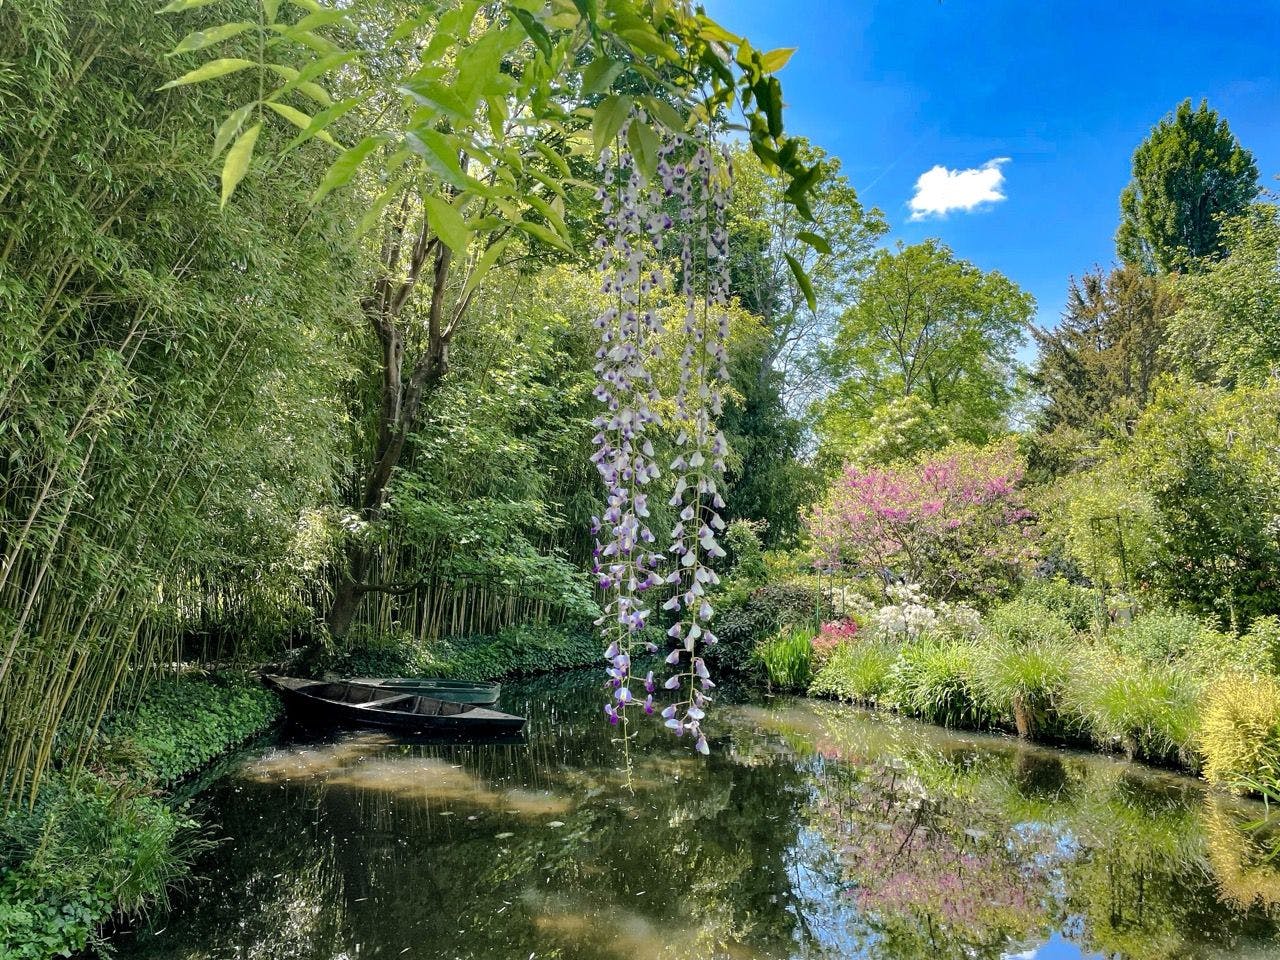 Monet's garden in Giverny France.